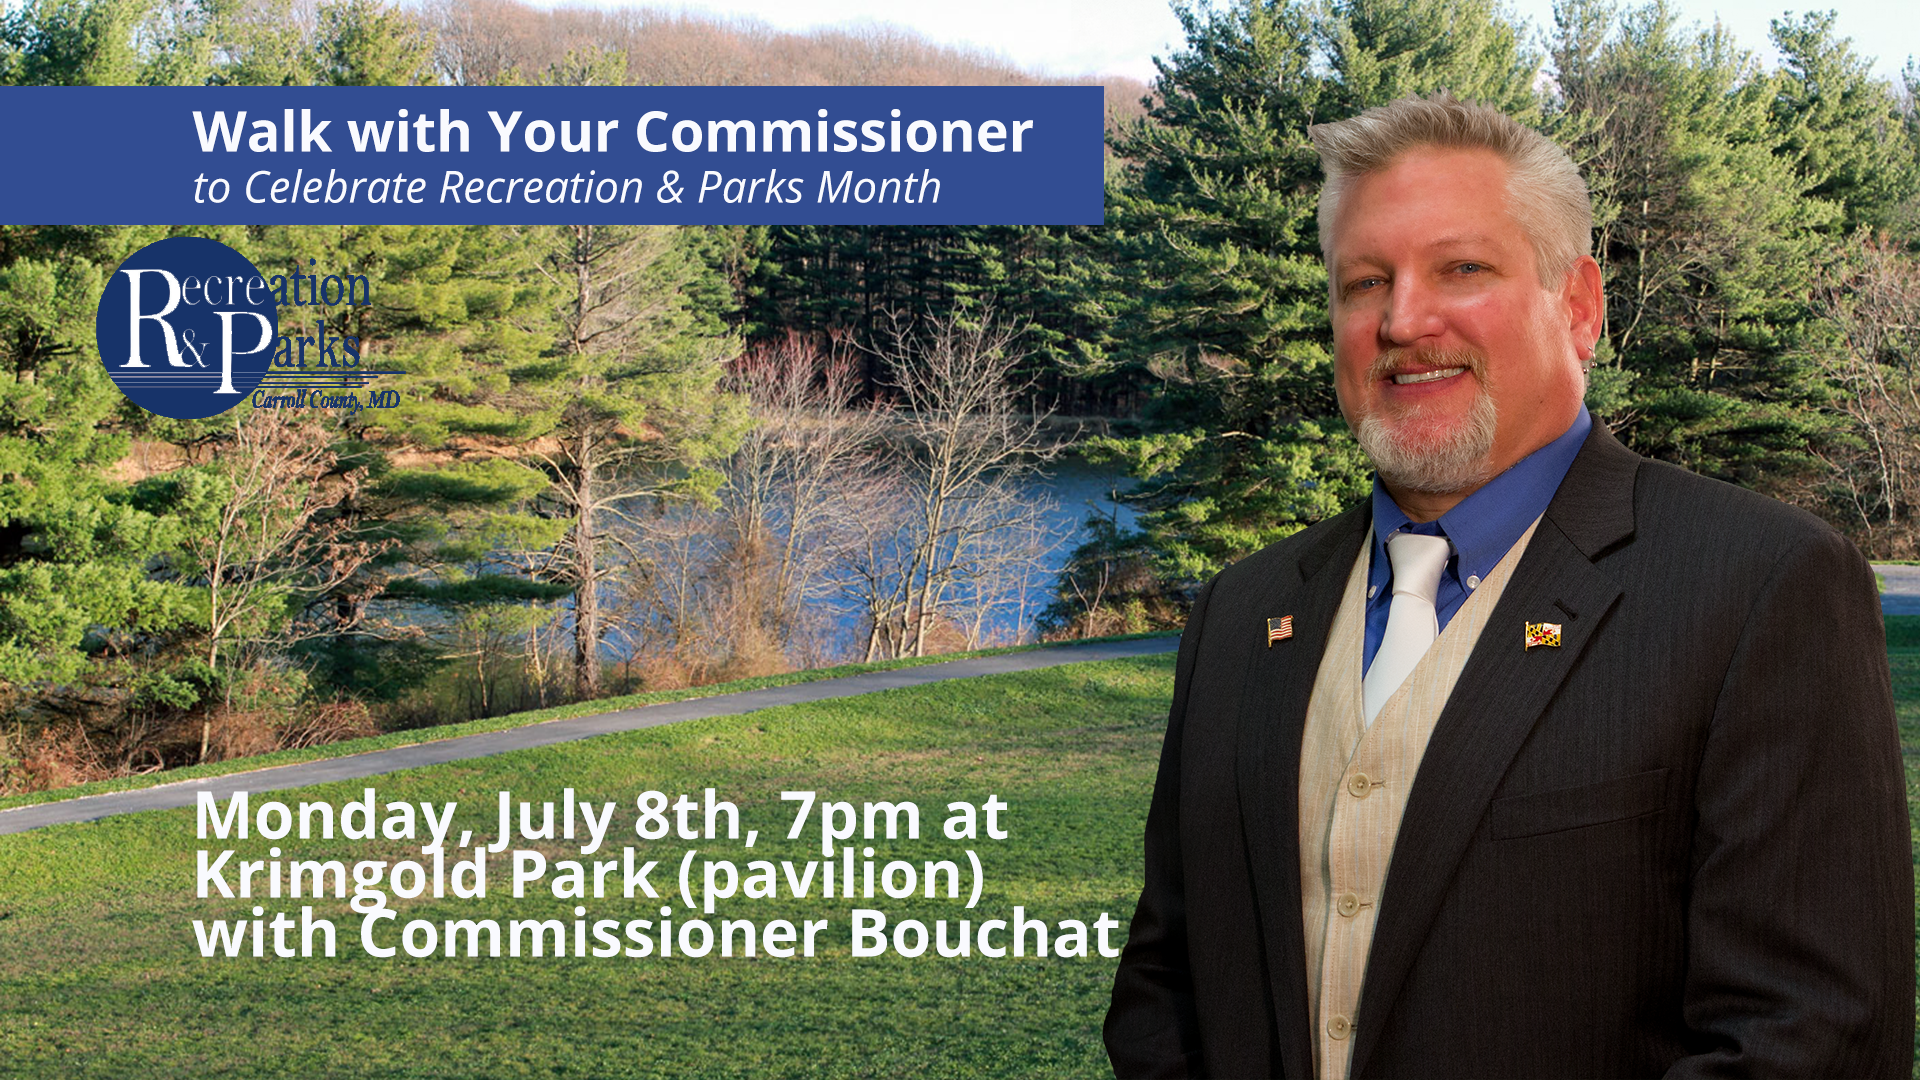 Walk with Commissioner Bouchat